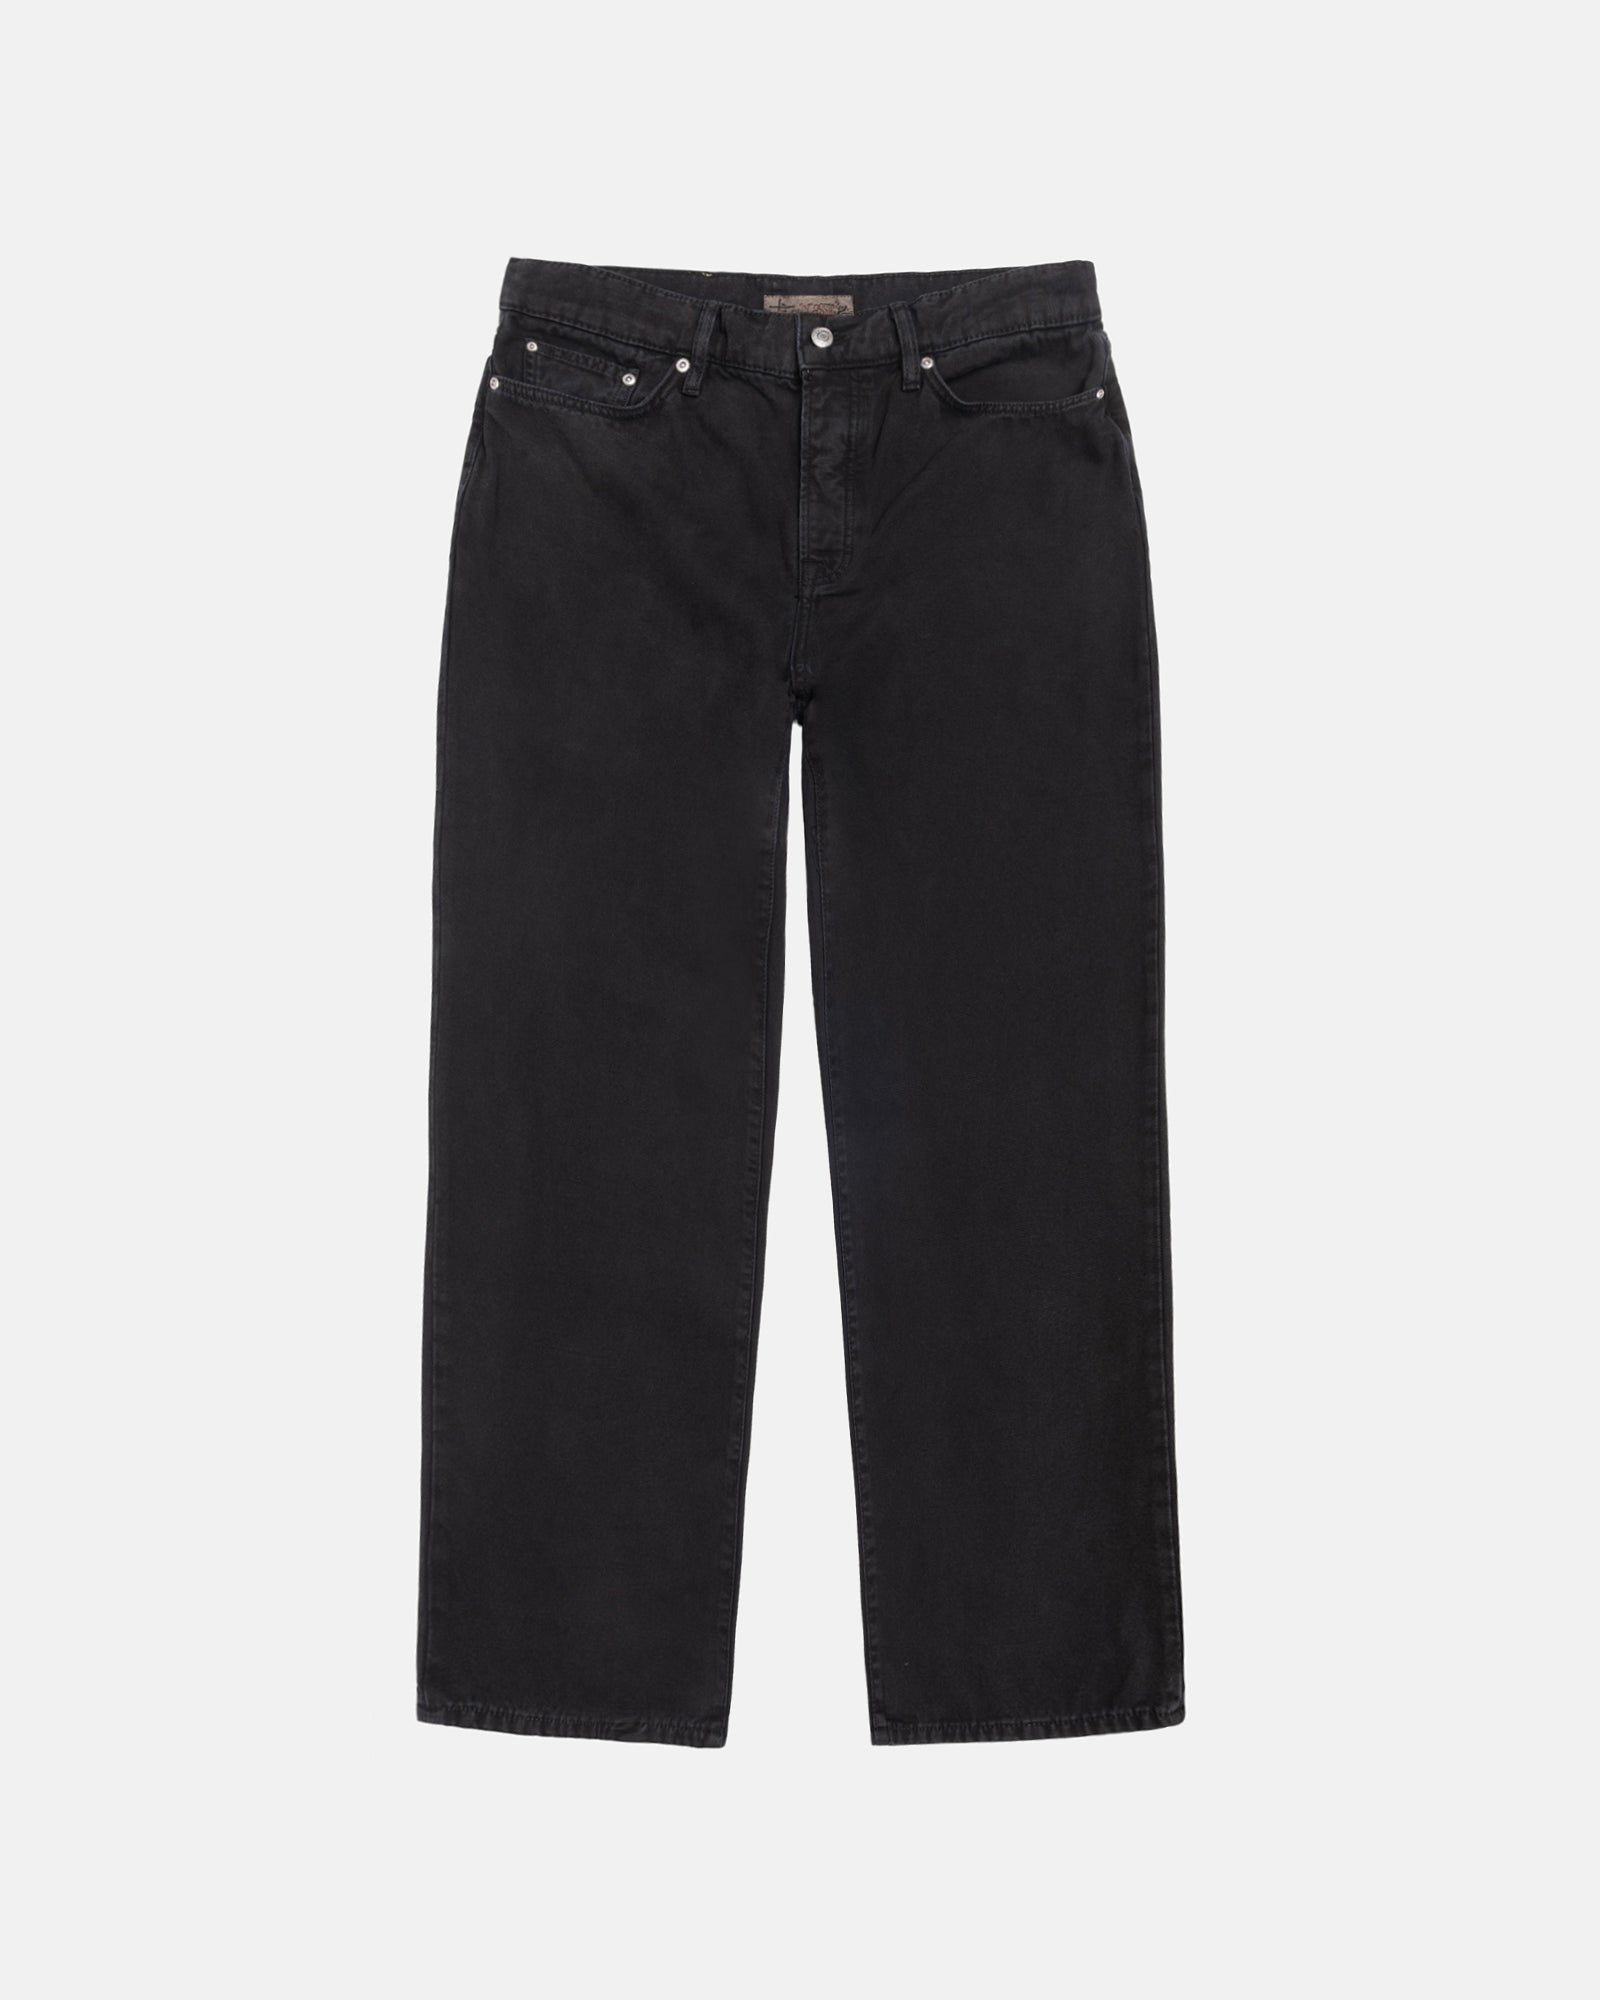 Classic Jean Washed Canvas in black – Stüssy Japan